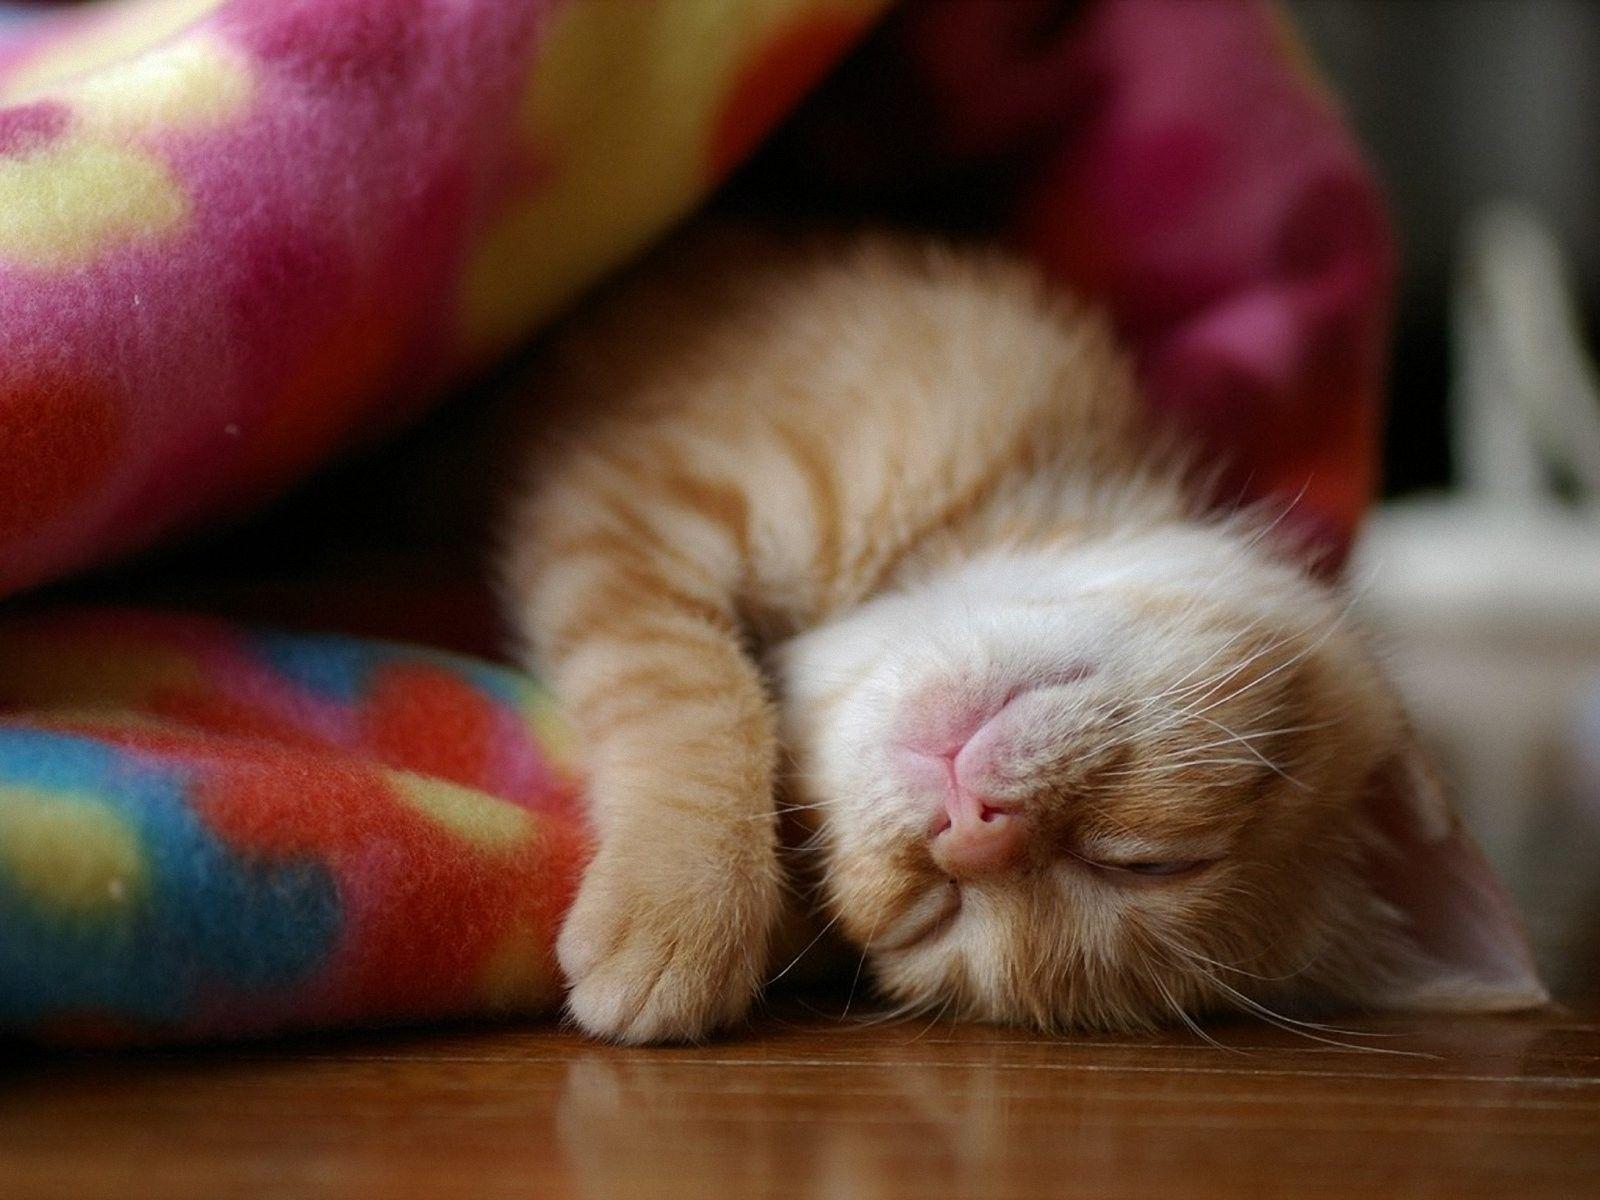 Kitten asleep in a blanket wallpaper and image